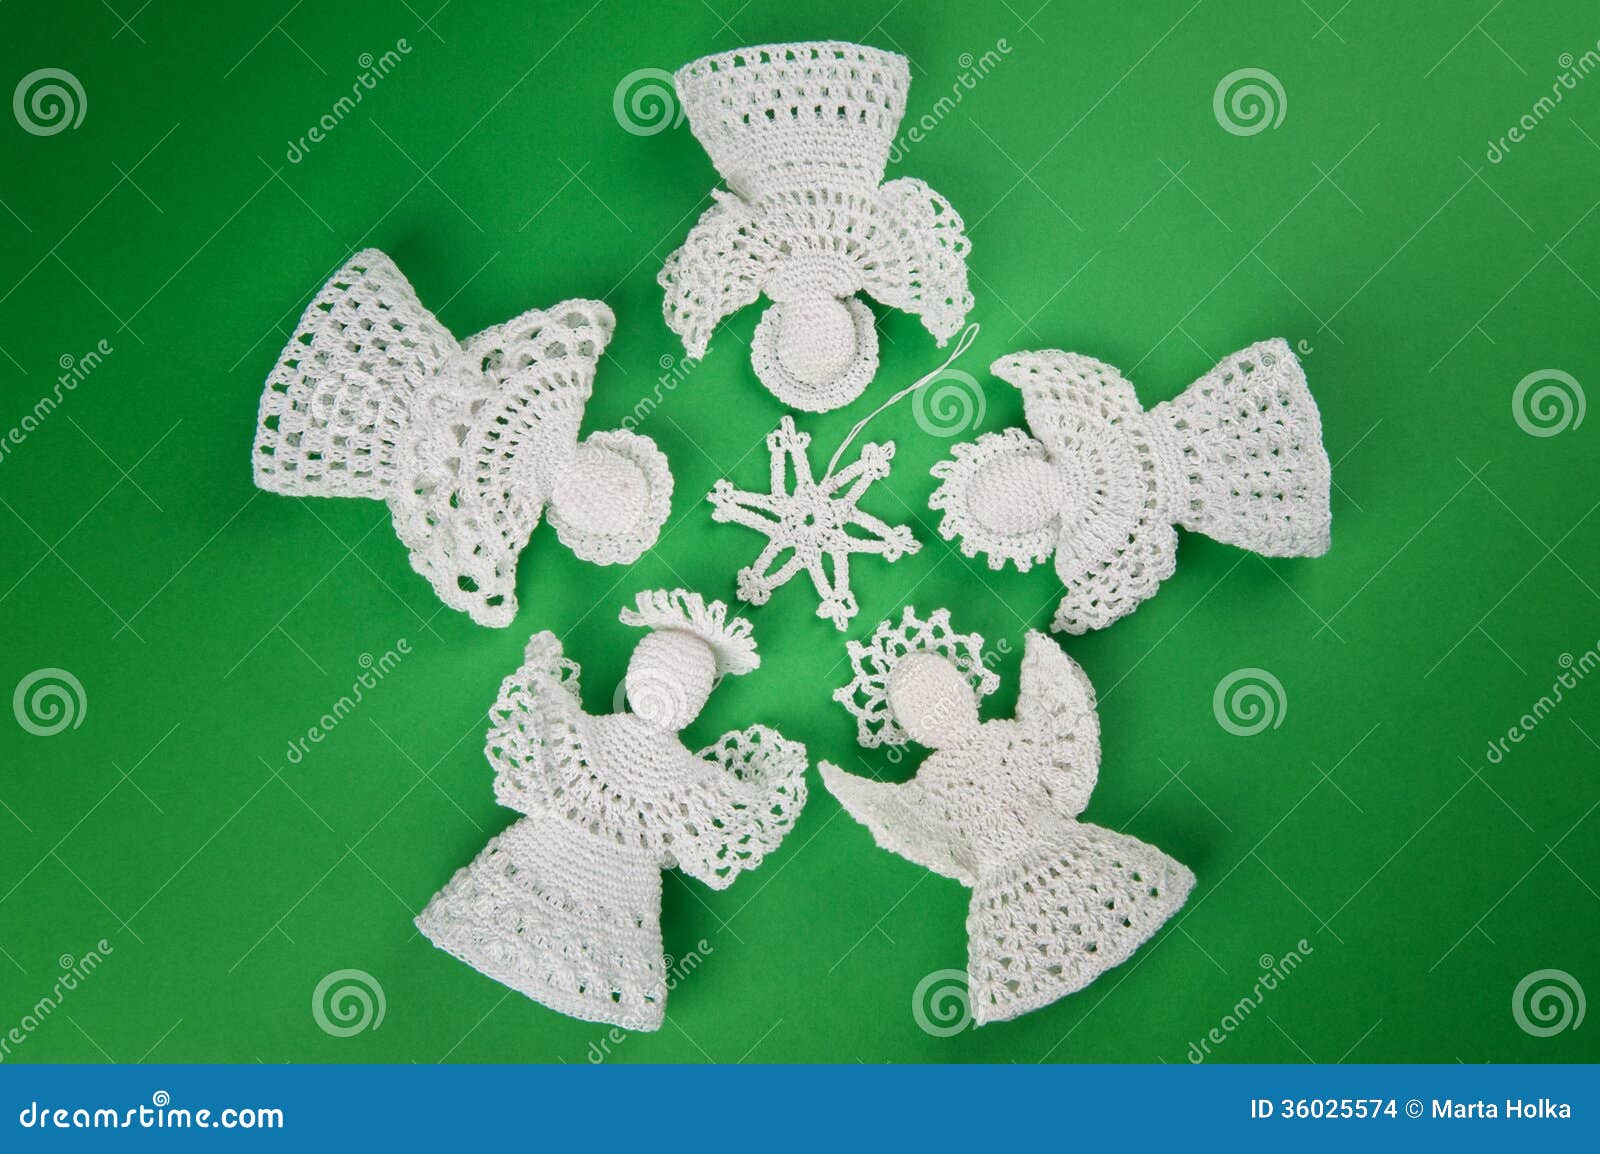 Crochet Angels Stock Images - Image: 36025574